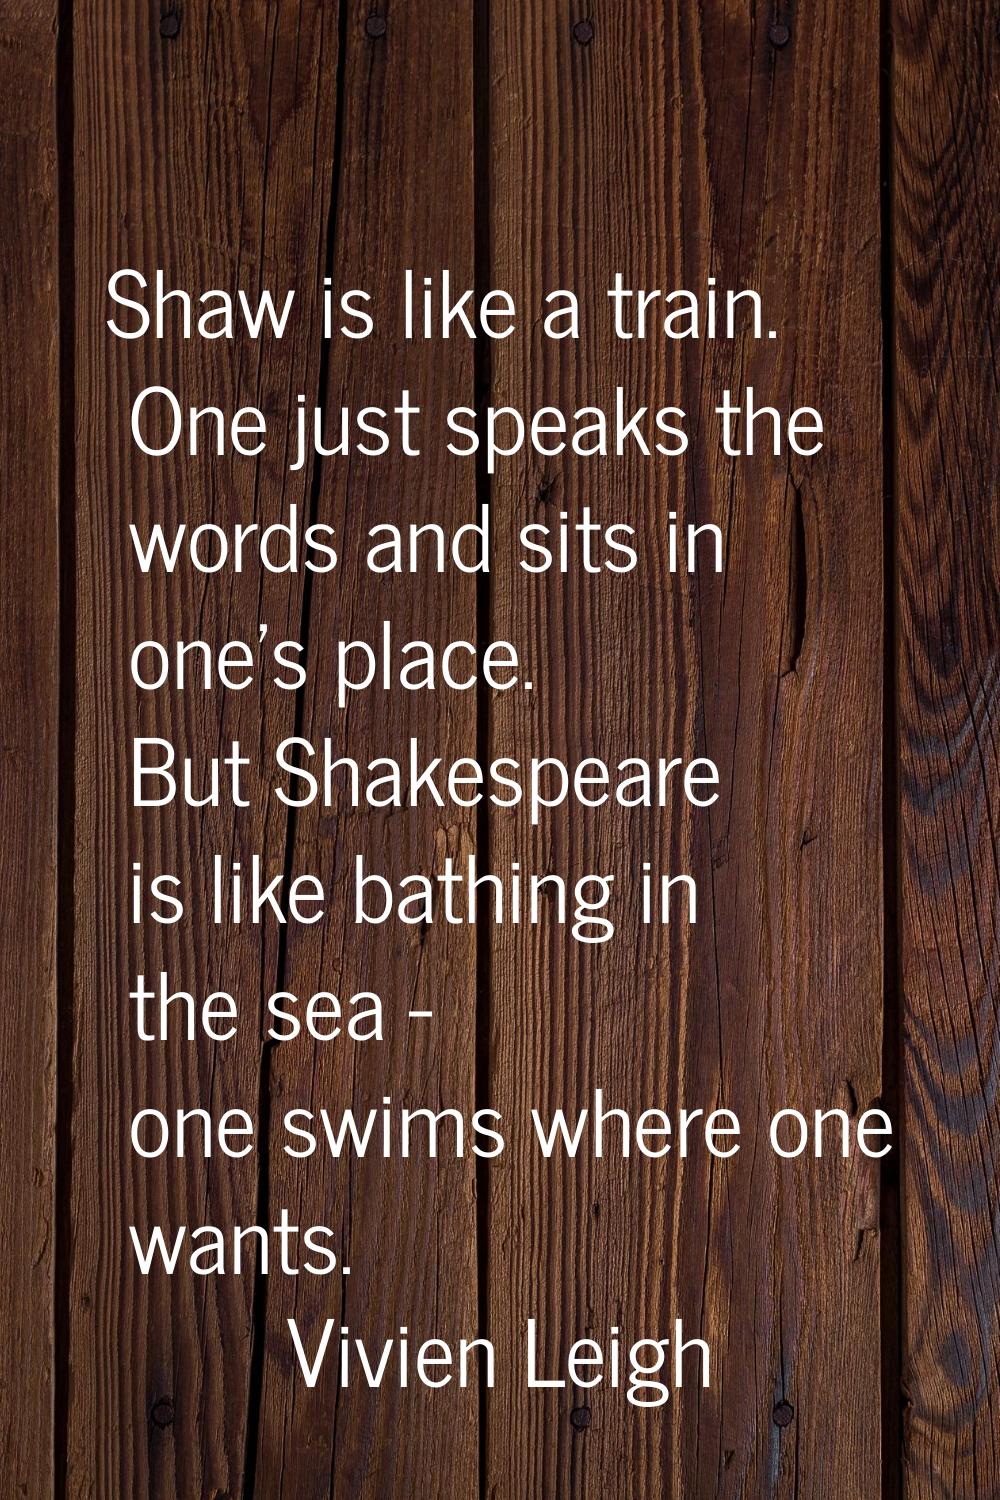 Shaw is like a train. One just speaks the words and sits in one's place. But Shakespeare is like ba